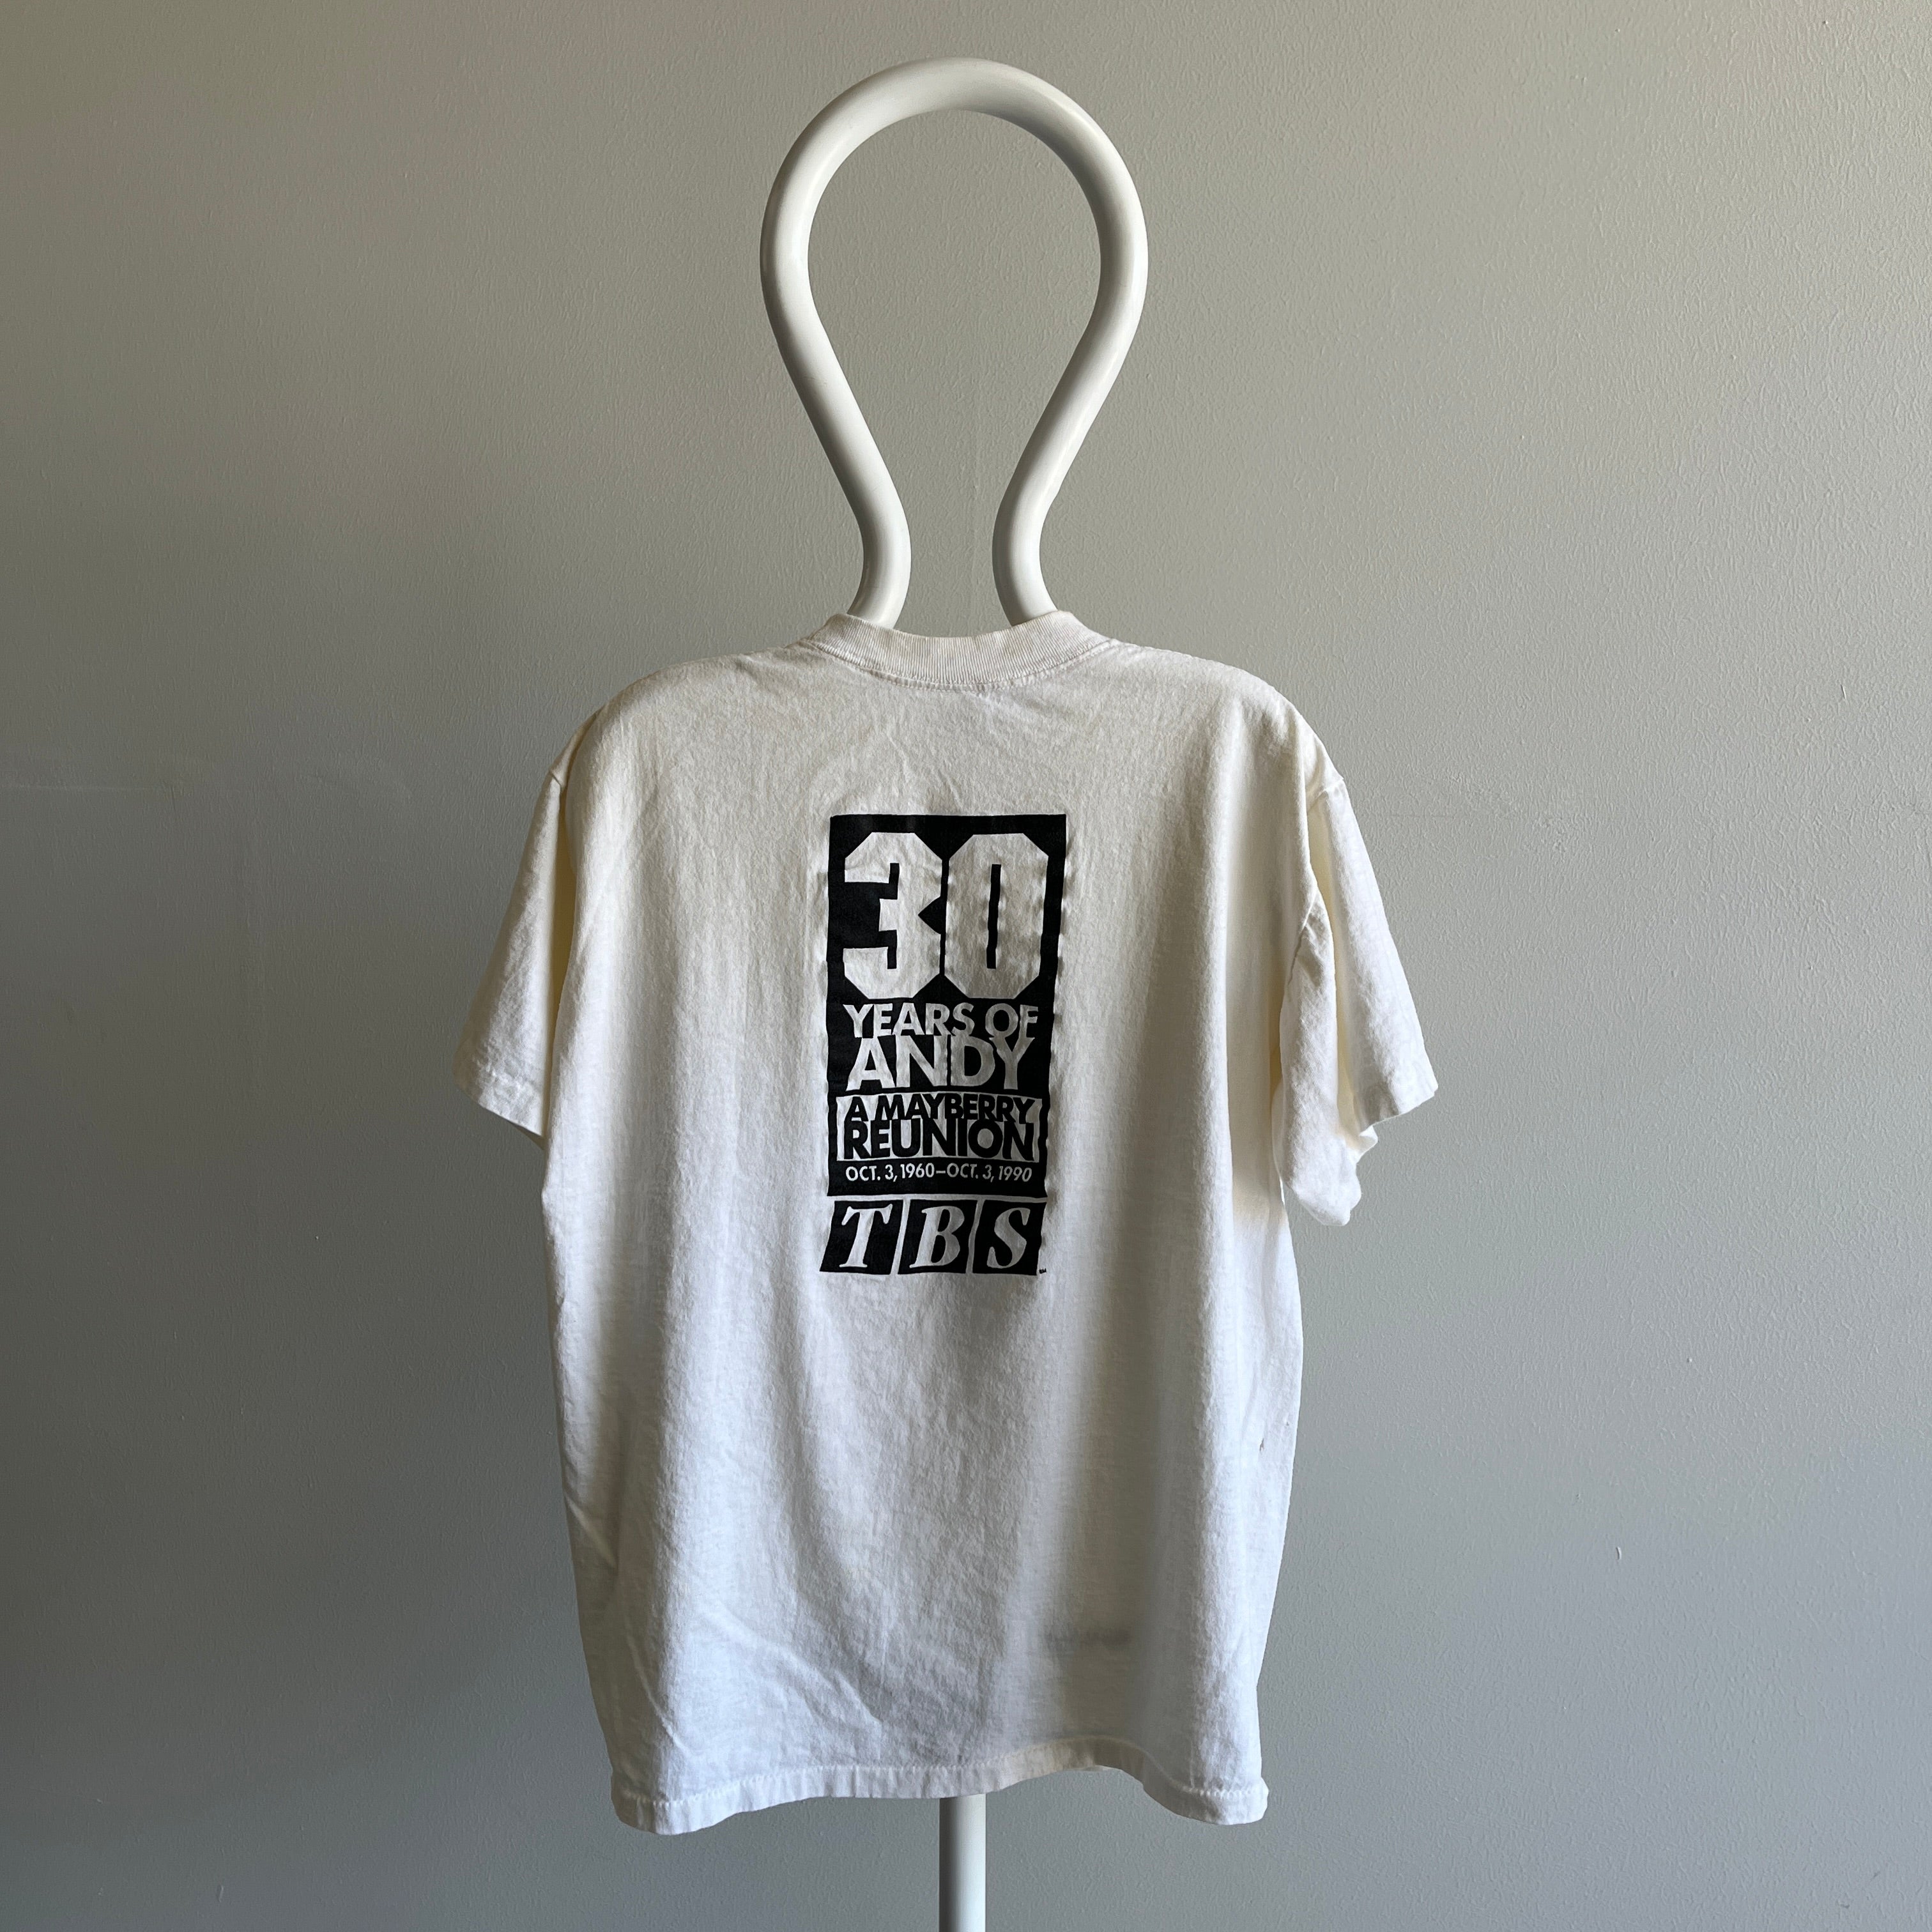 1990 Andy Griffith 50 Year Anniversary T-Shirt